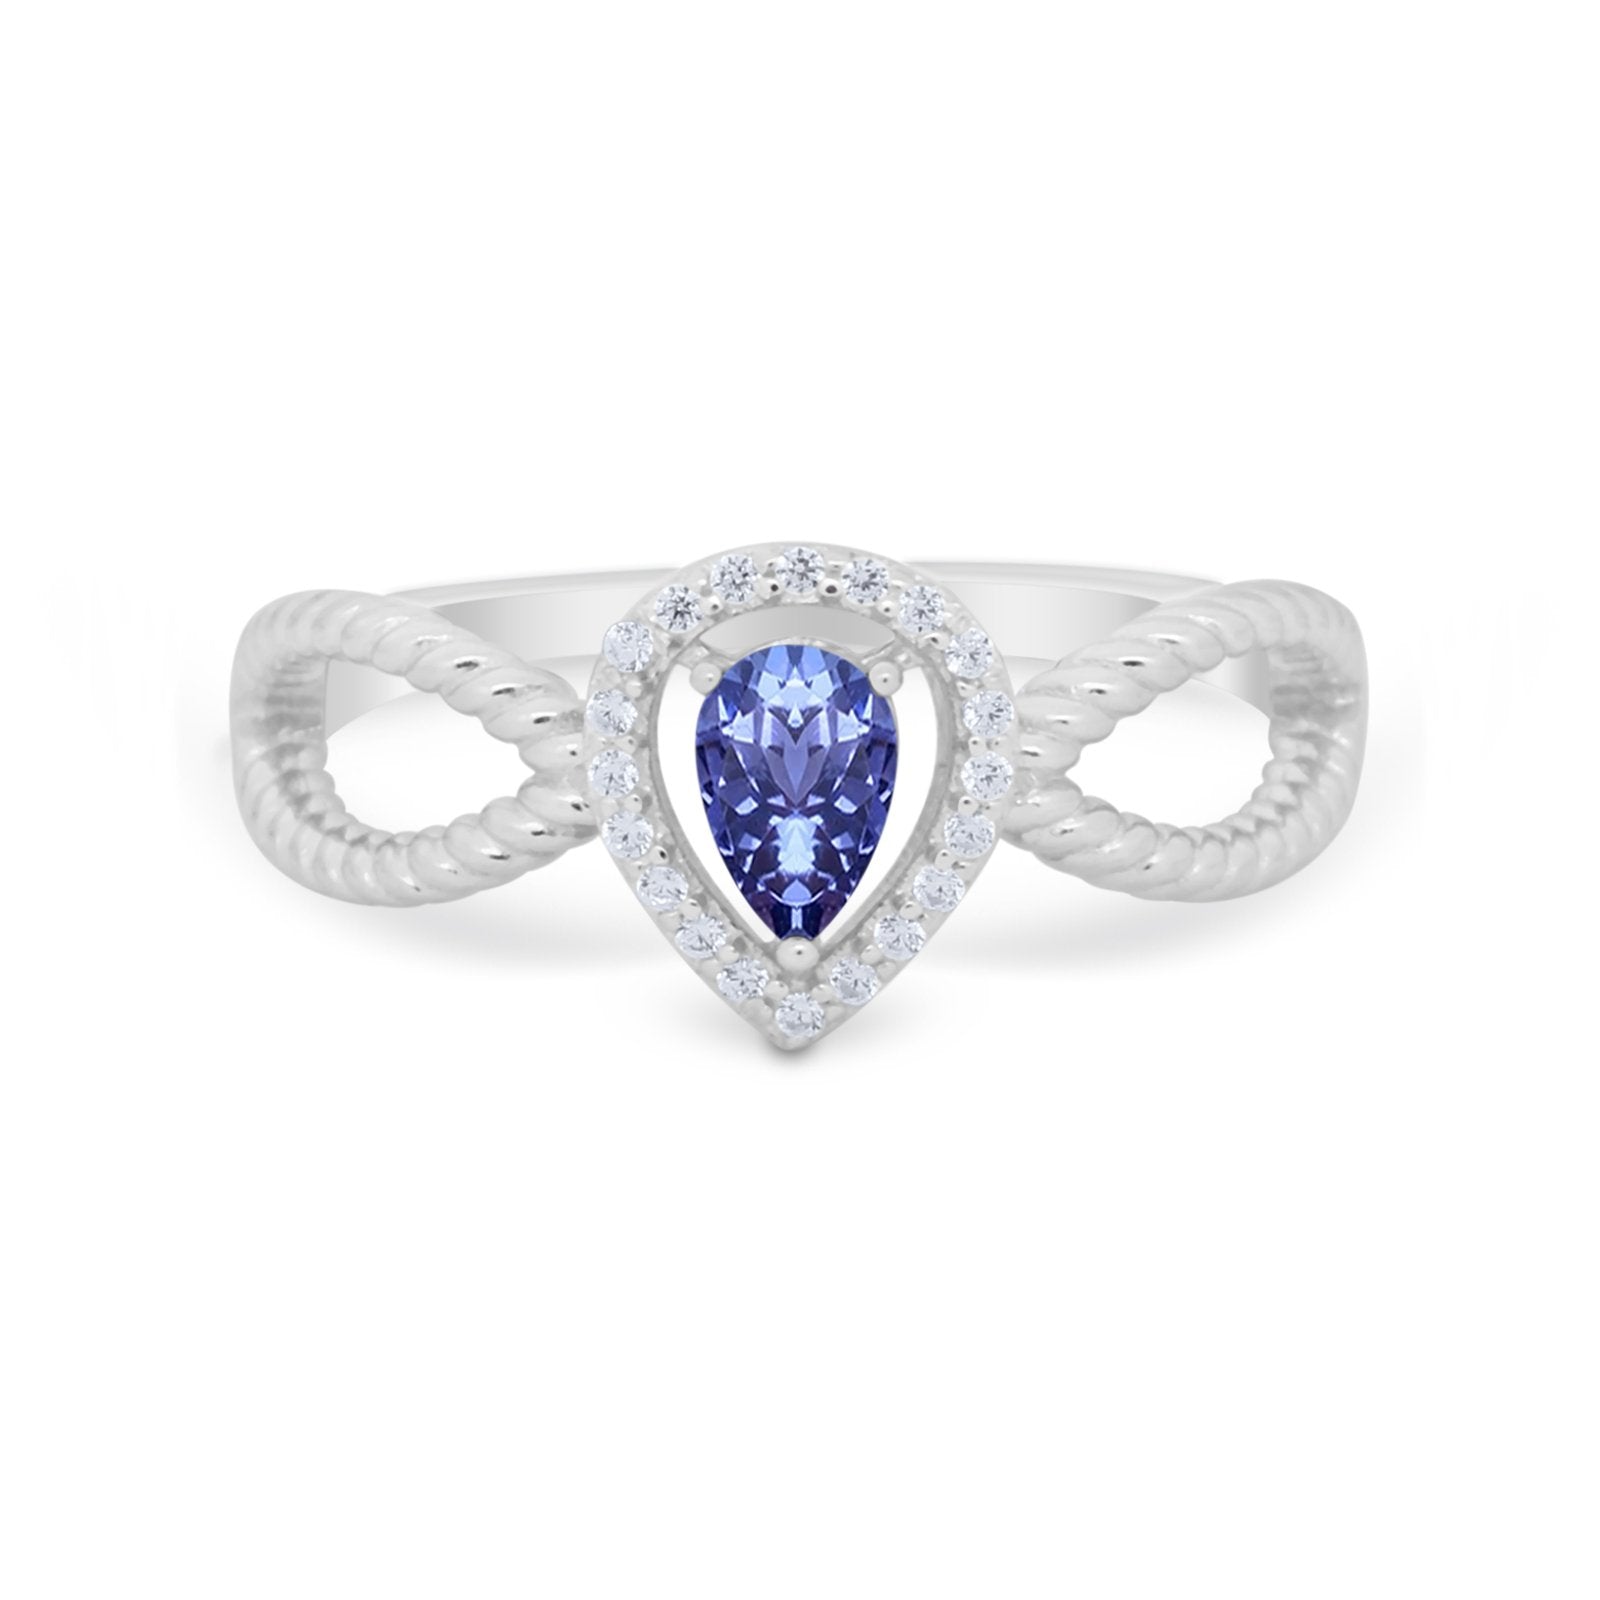 Teardrop Wedding Ring Pear Round Simulated Tanzanite CZ 925 Sterling Silver